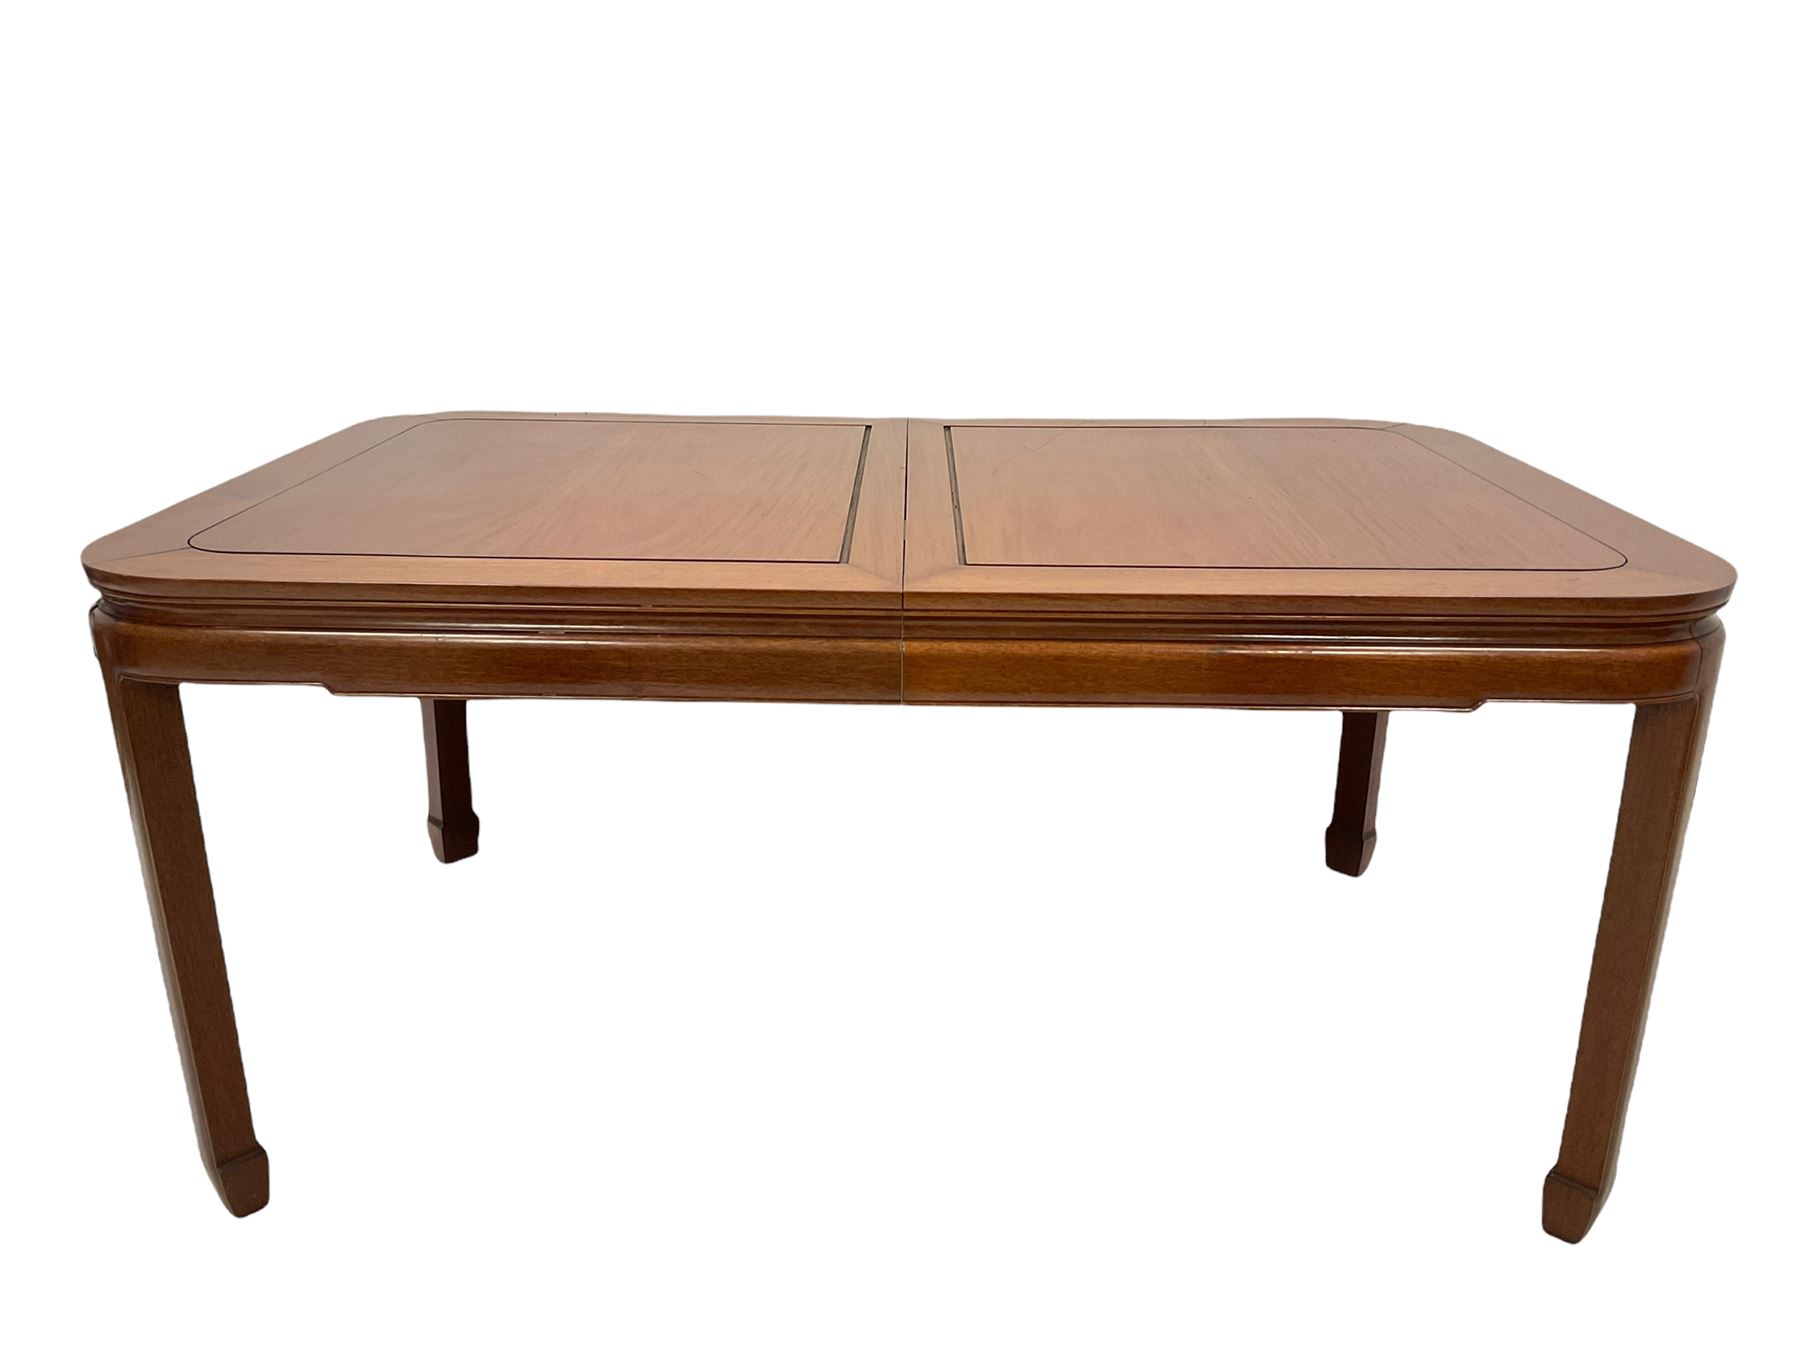 Contemporary Chinese rosewood extending dining table - Image 6 of 6